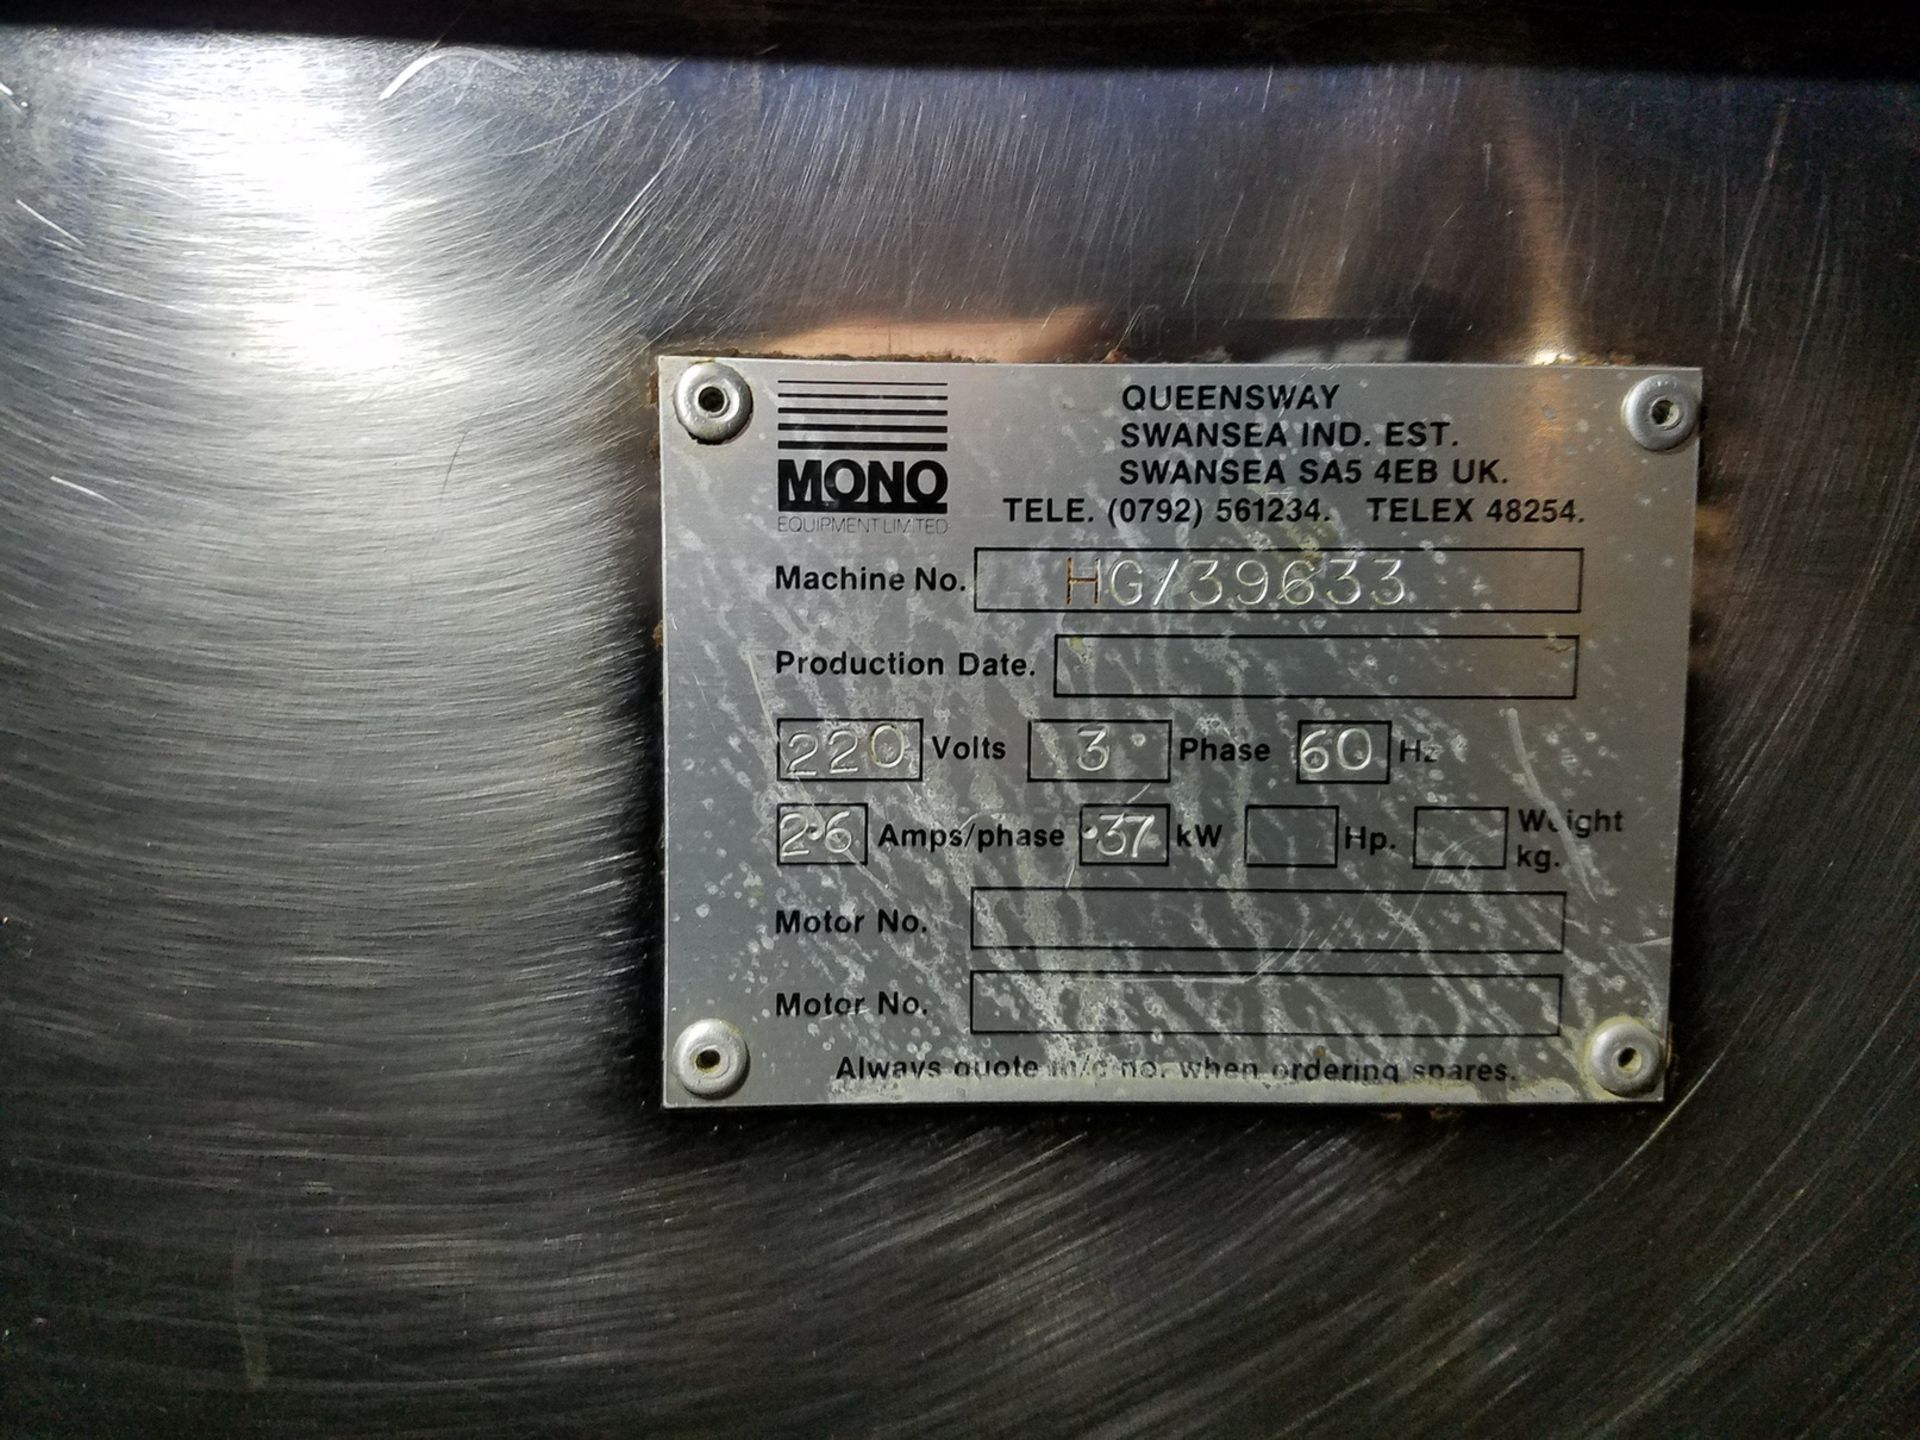 Mono Dough Rounder, M# Rondo, S/N HG/39633 | Rigging and Loading Fee: $25 - Image 2 of 2